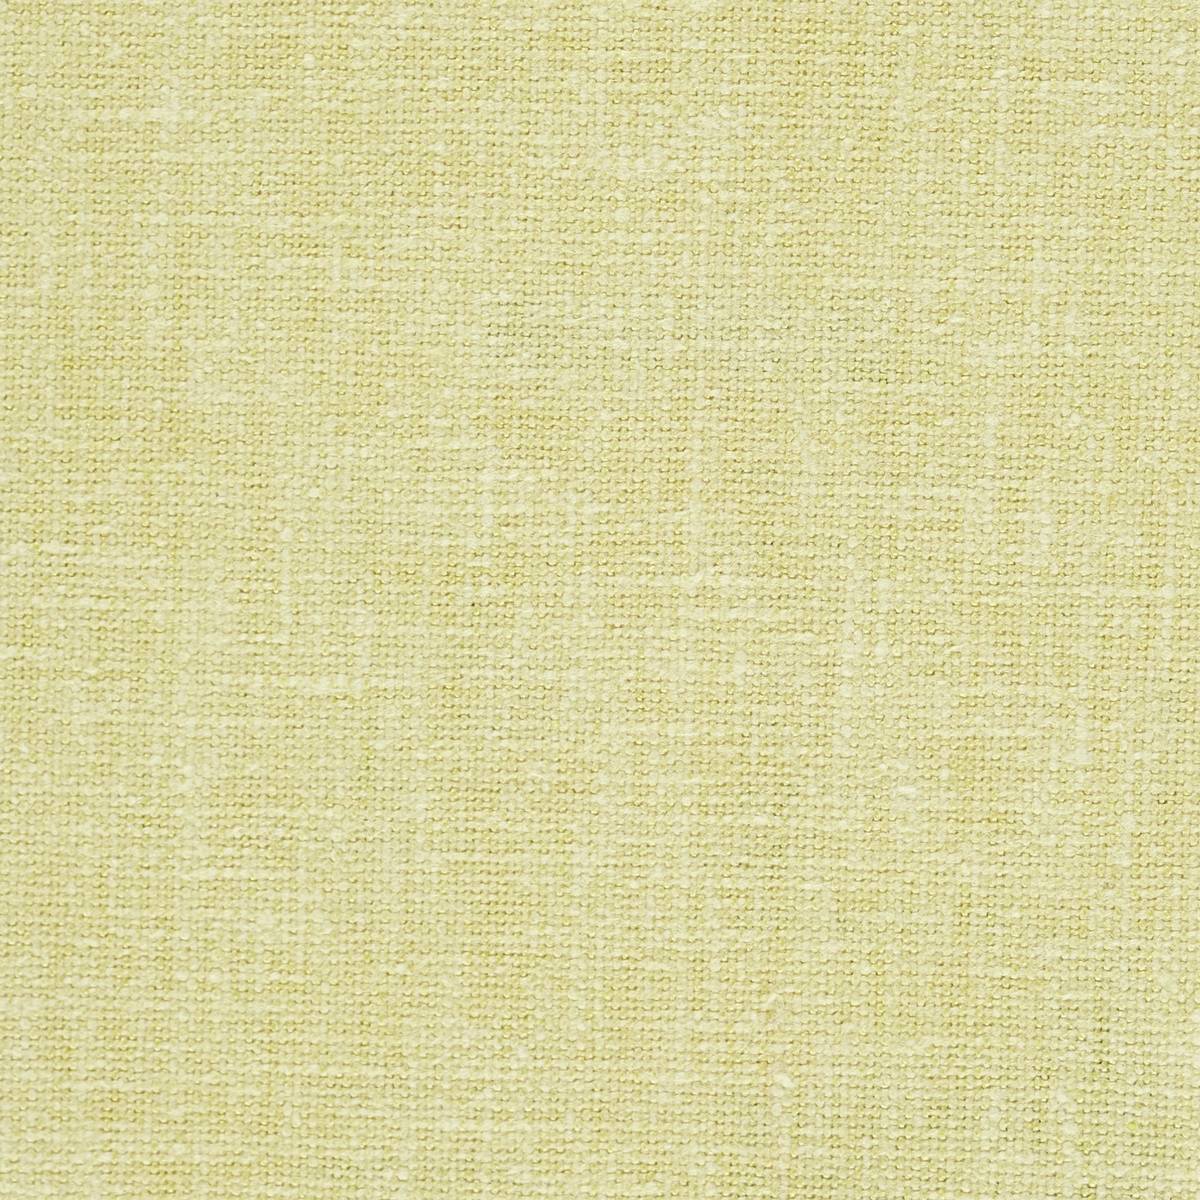 Gamma Sorbet Fabric by Harlequin